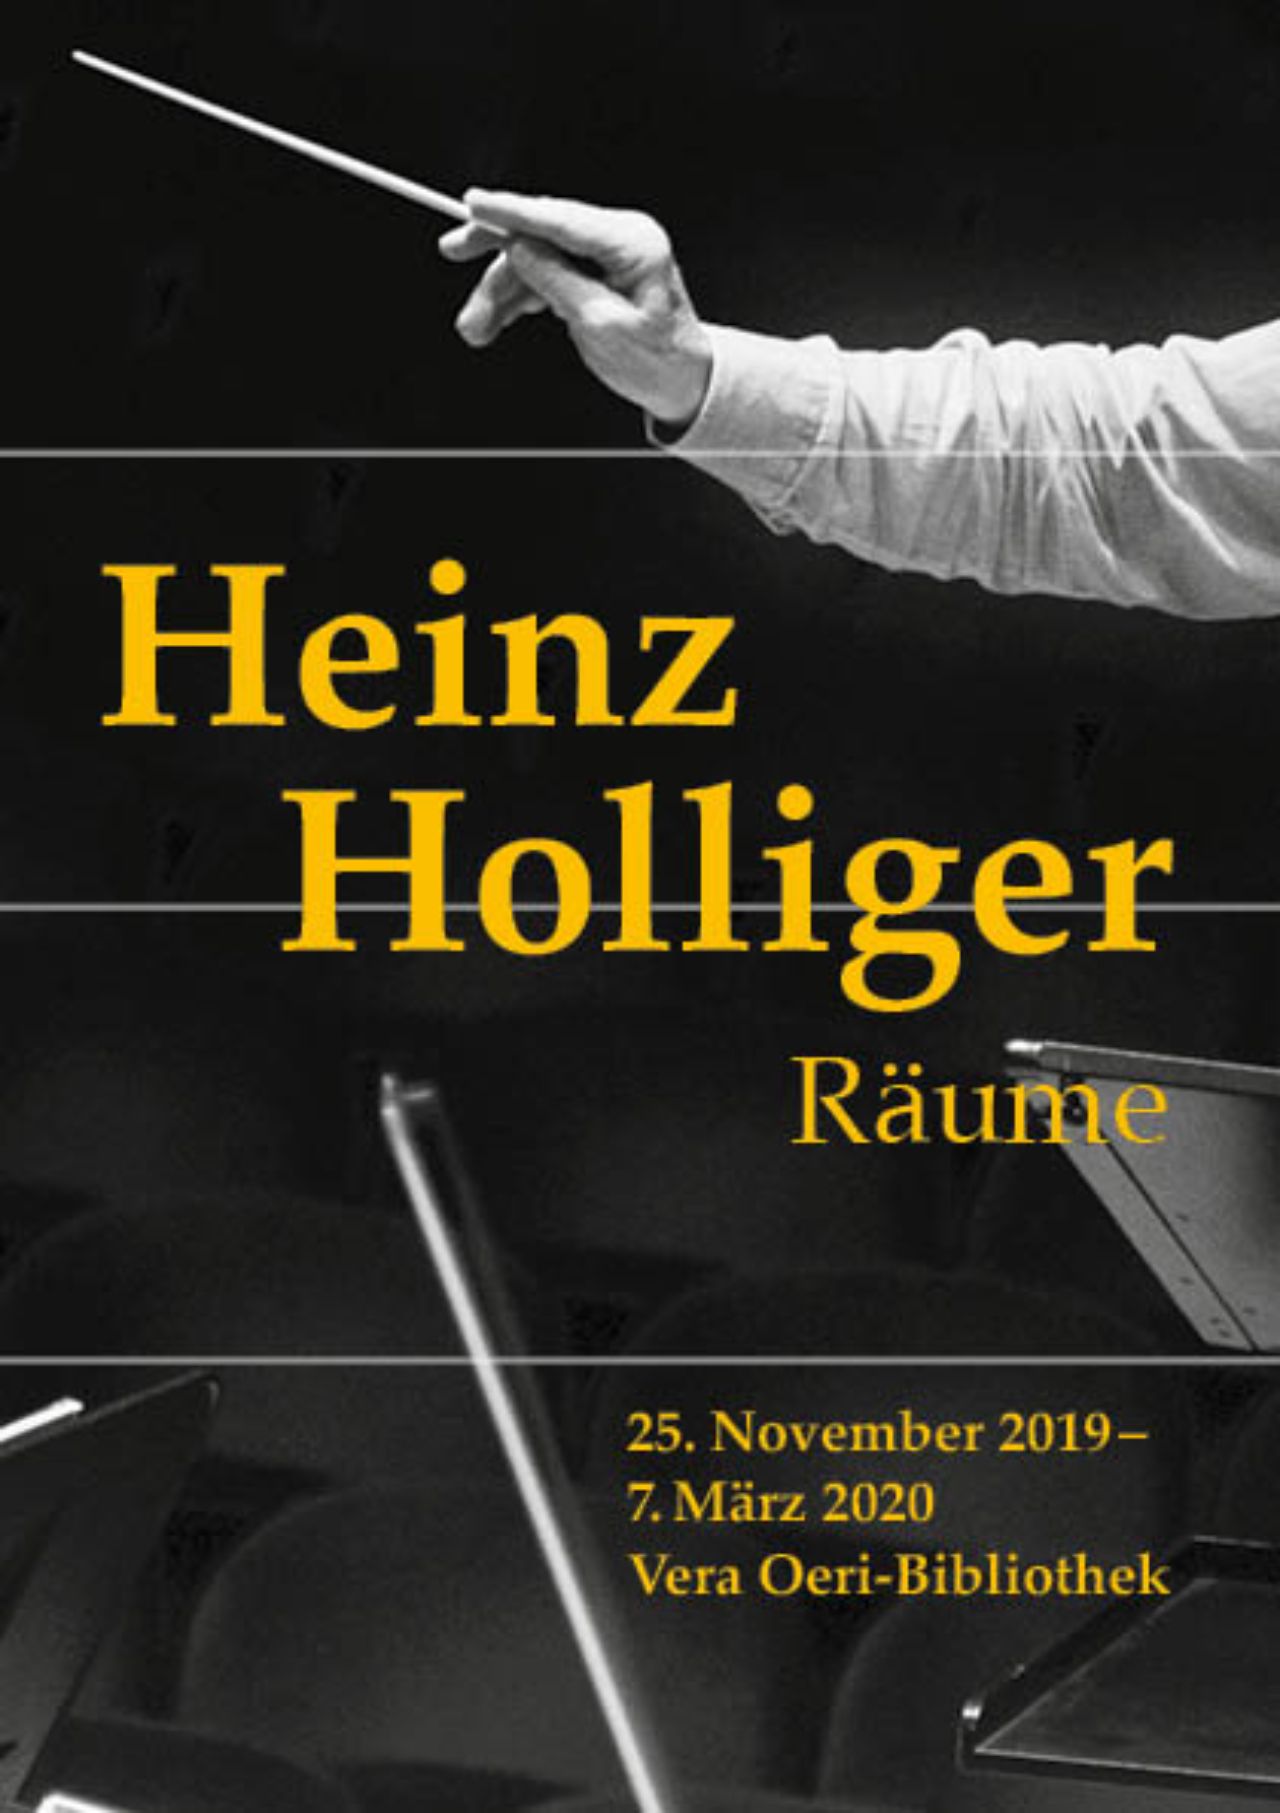 Cover of the publication "Heinz Holliger - Räume"